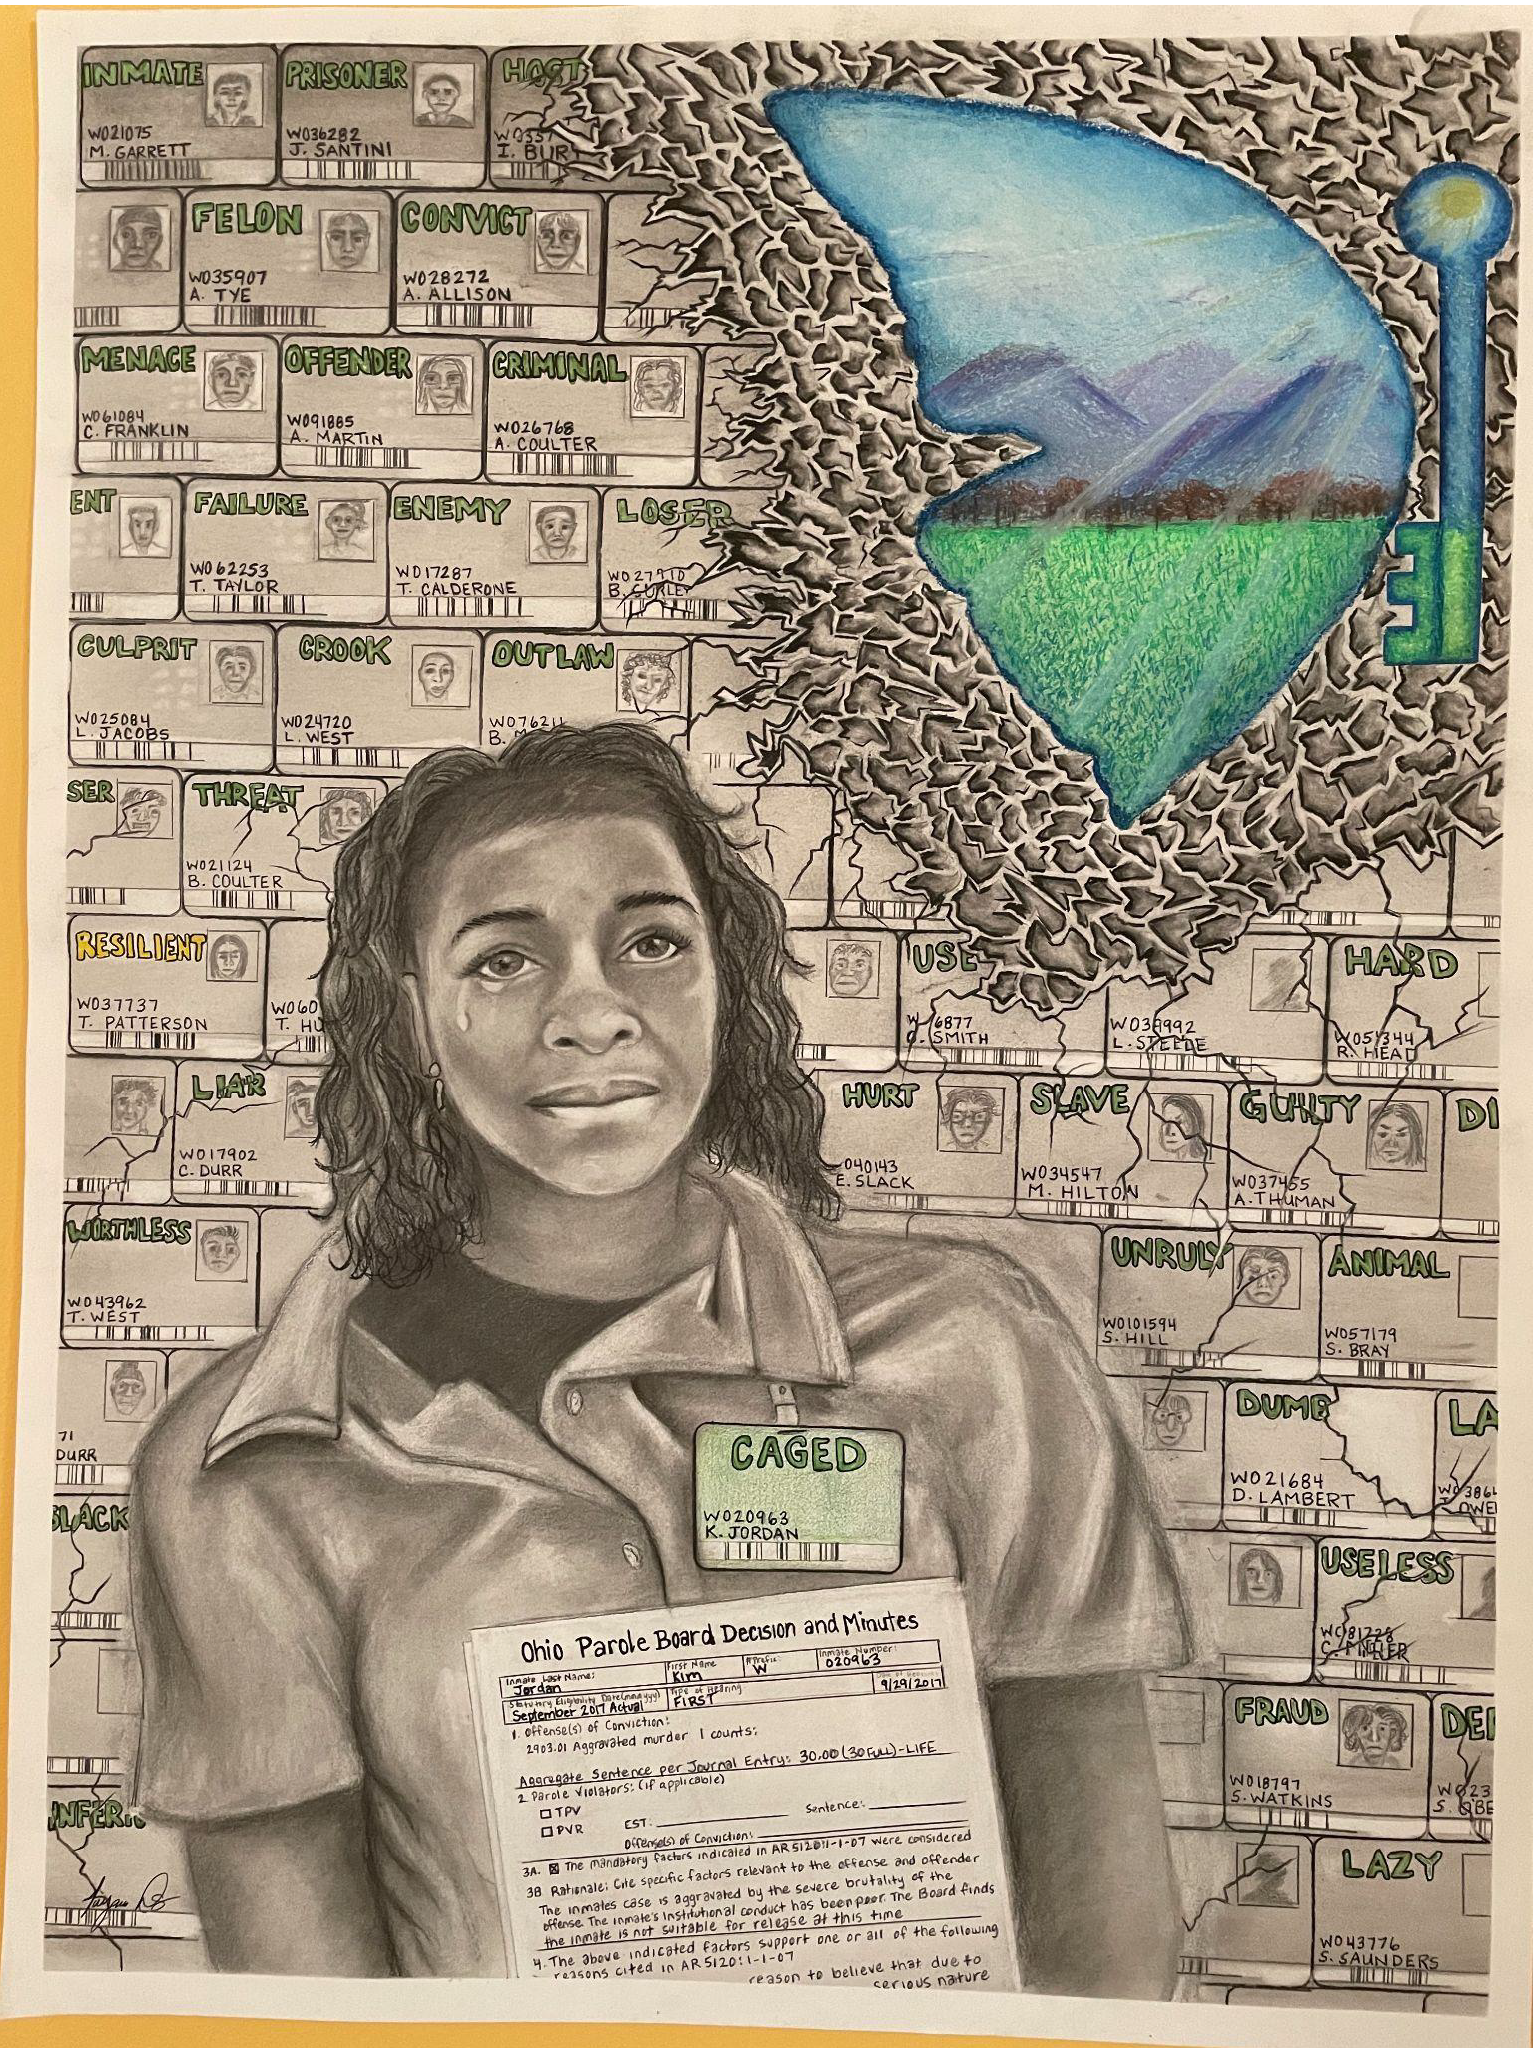 A woman cries in the foreground with an ID card that reads "caged" attached to her shirt, a myriad of ID cards create the background of the piece. A butterly made from the images of a mountain range and a key soars on the top right corner.